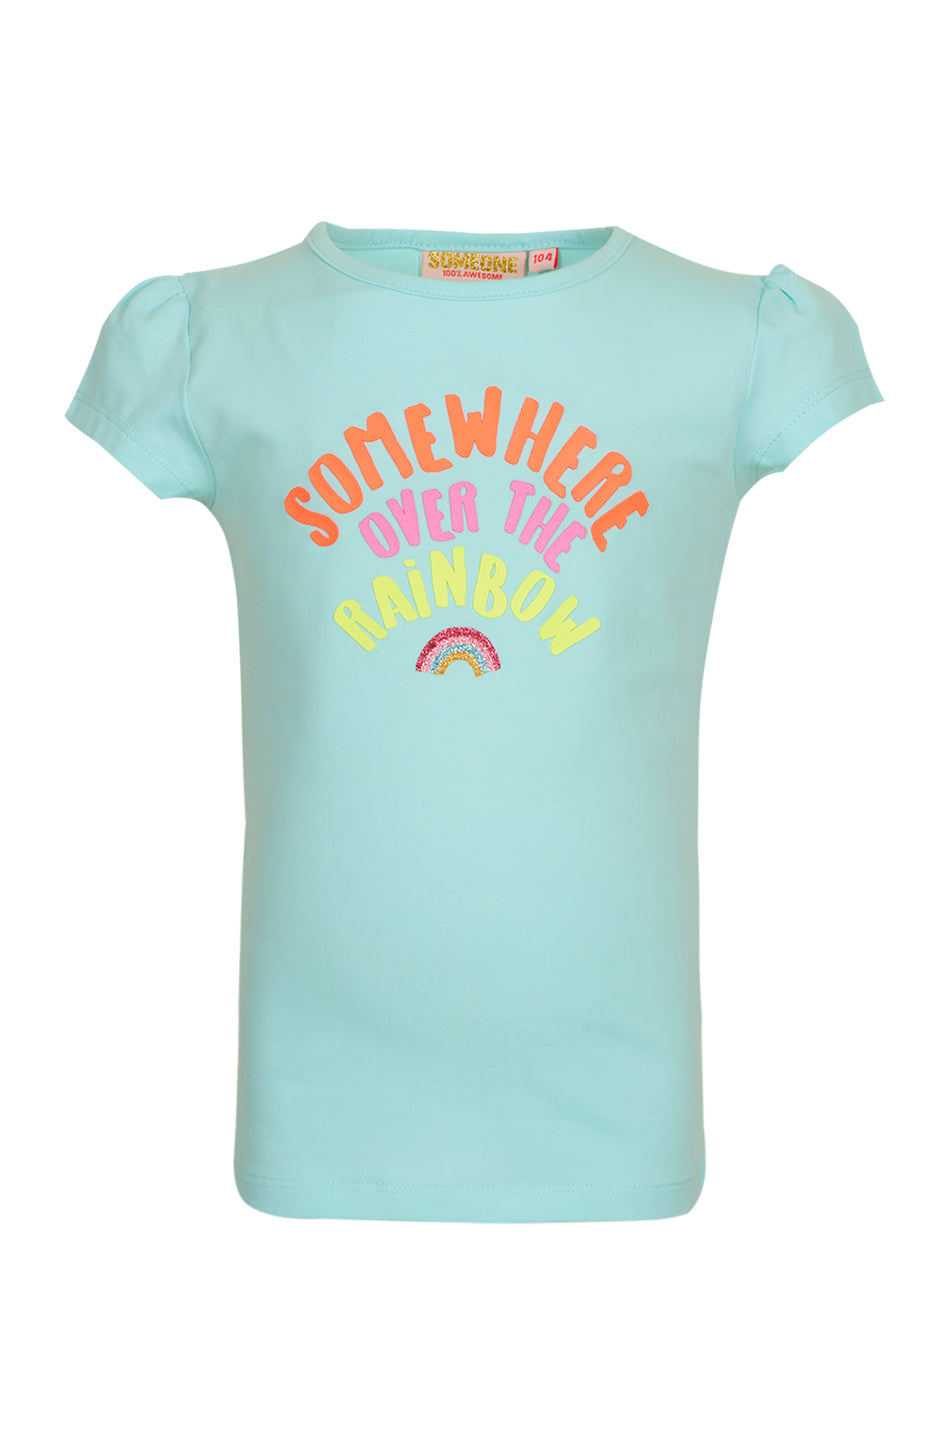 Someone T-Shirt Short Sleeve TWINKLE-SG-02-H